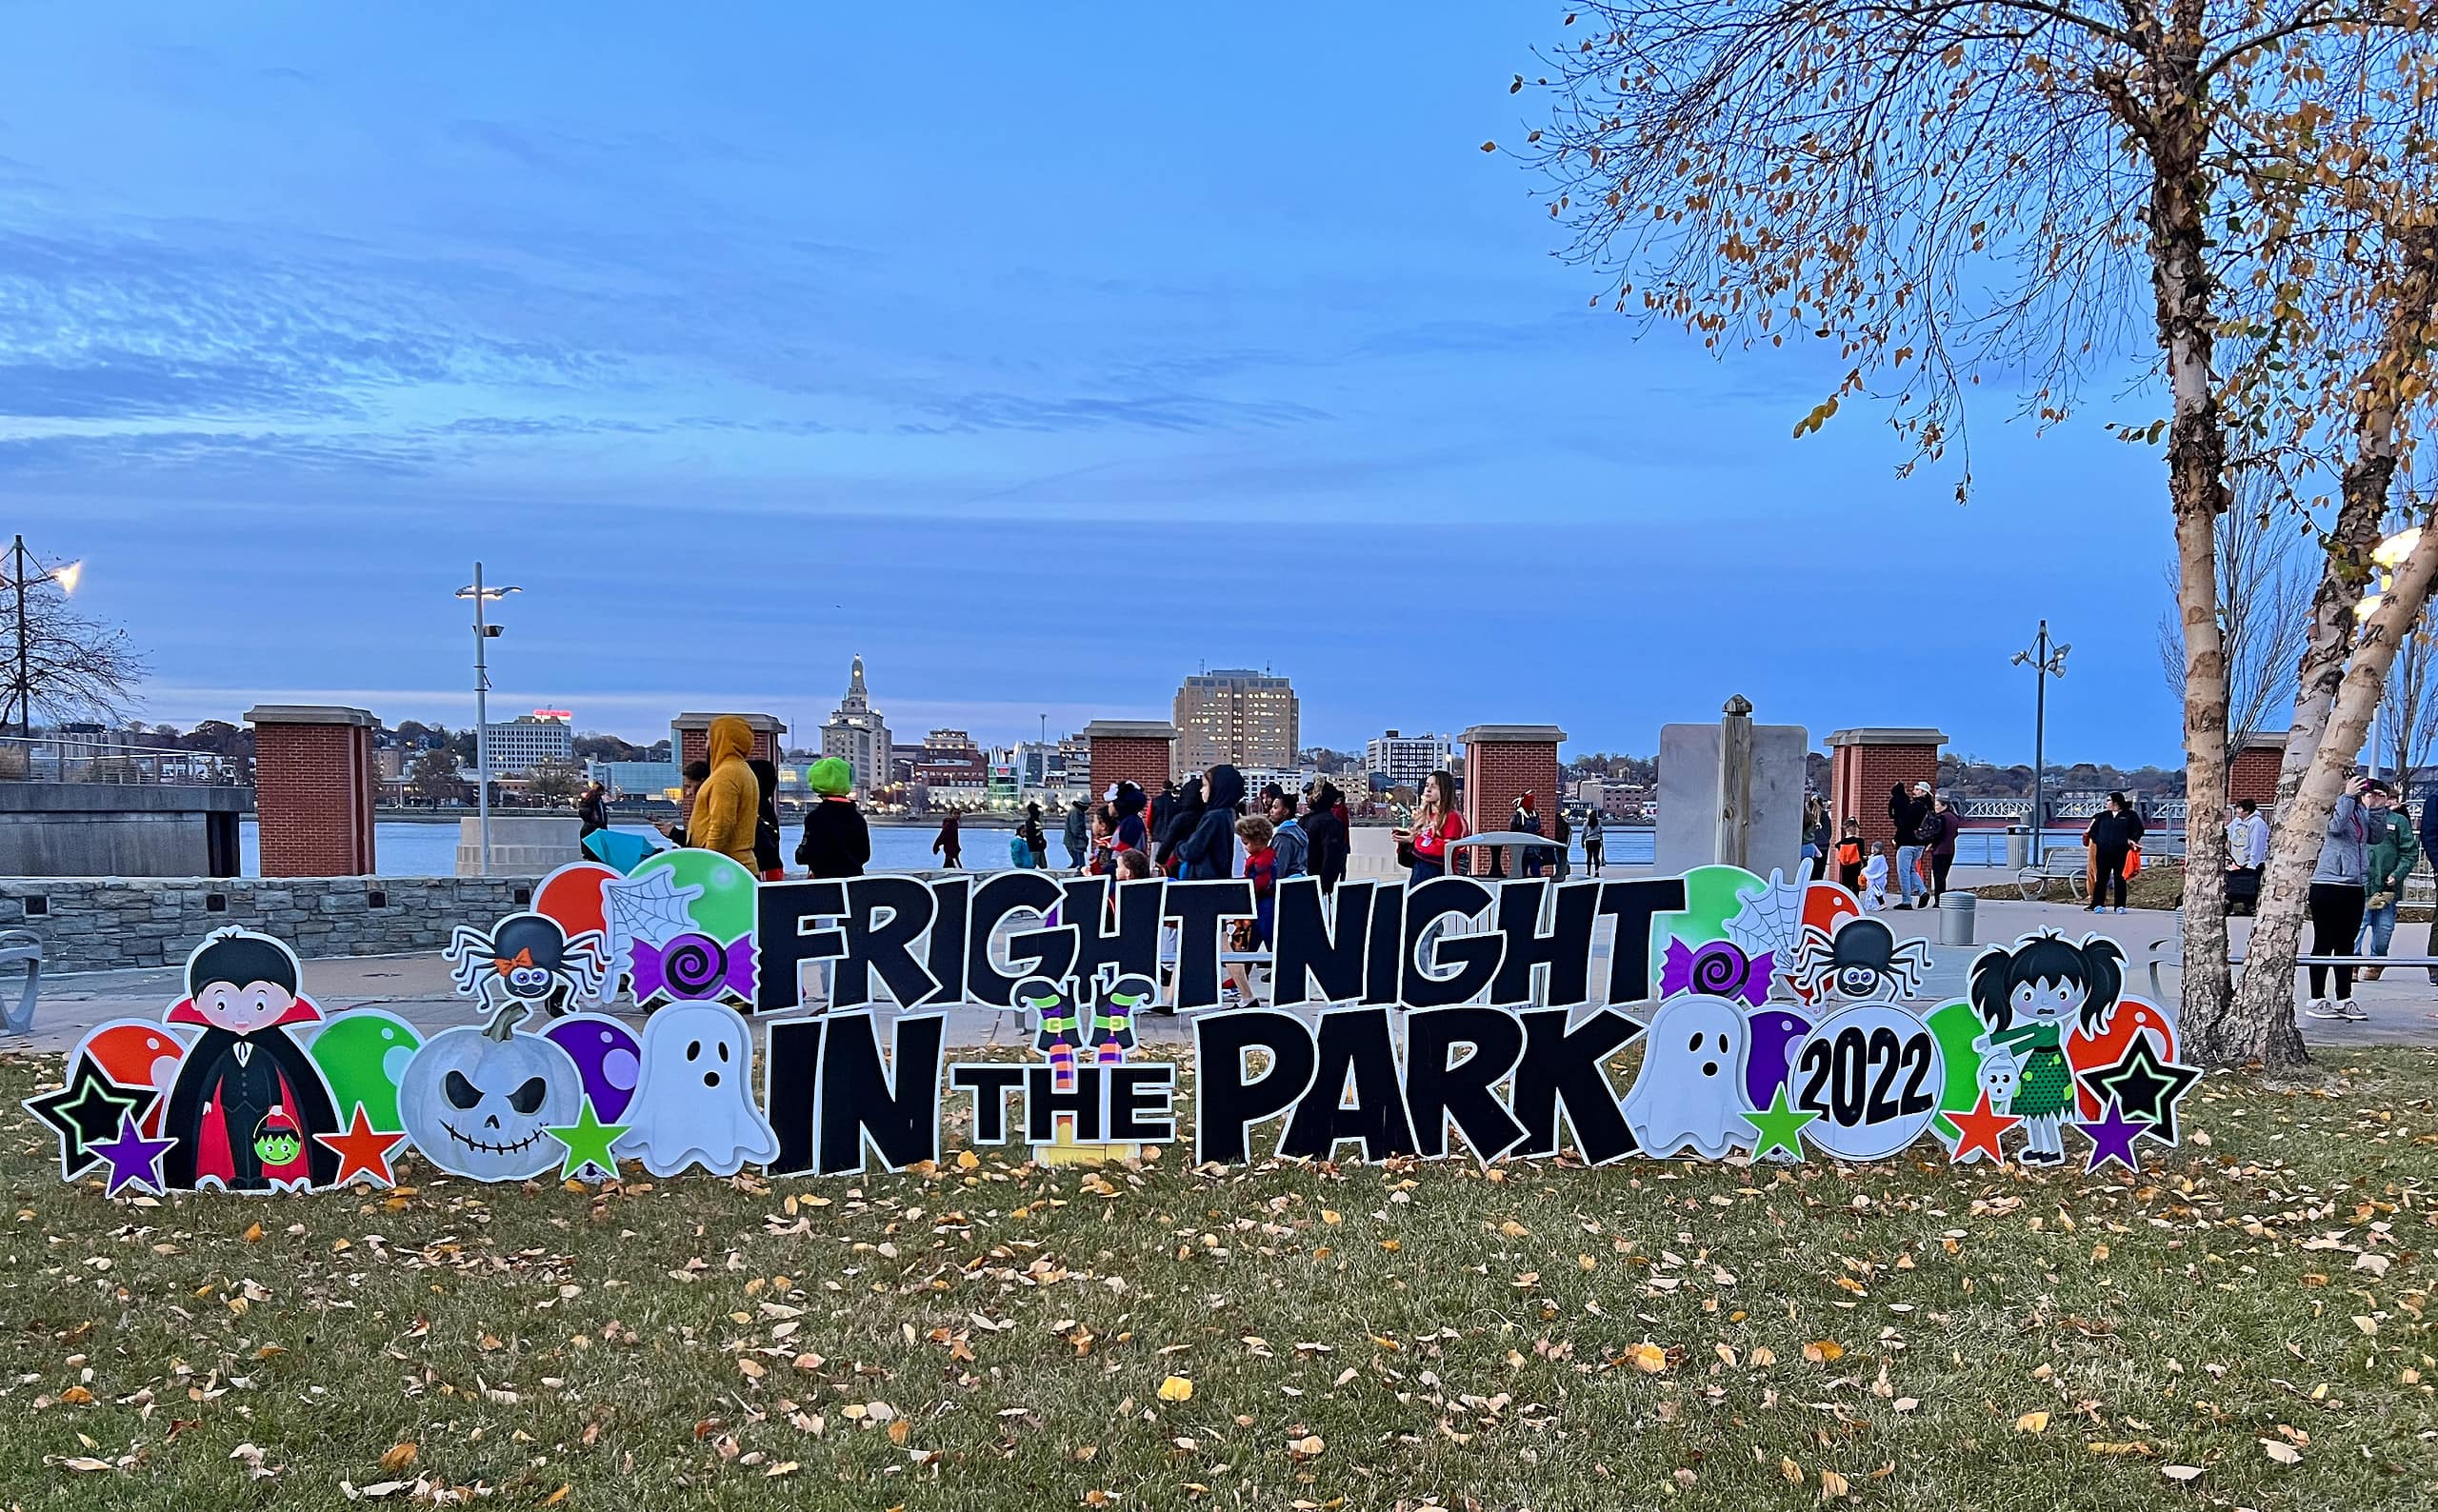 Fright Night in the Park image from the 2022 celebration.